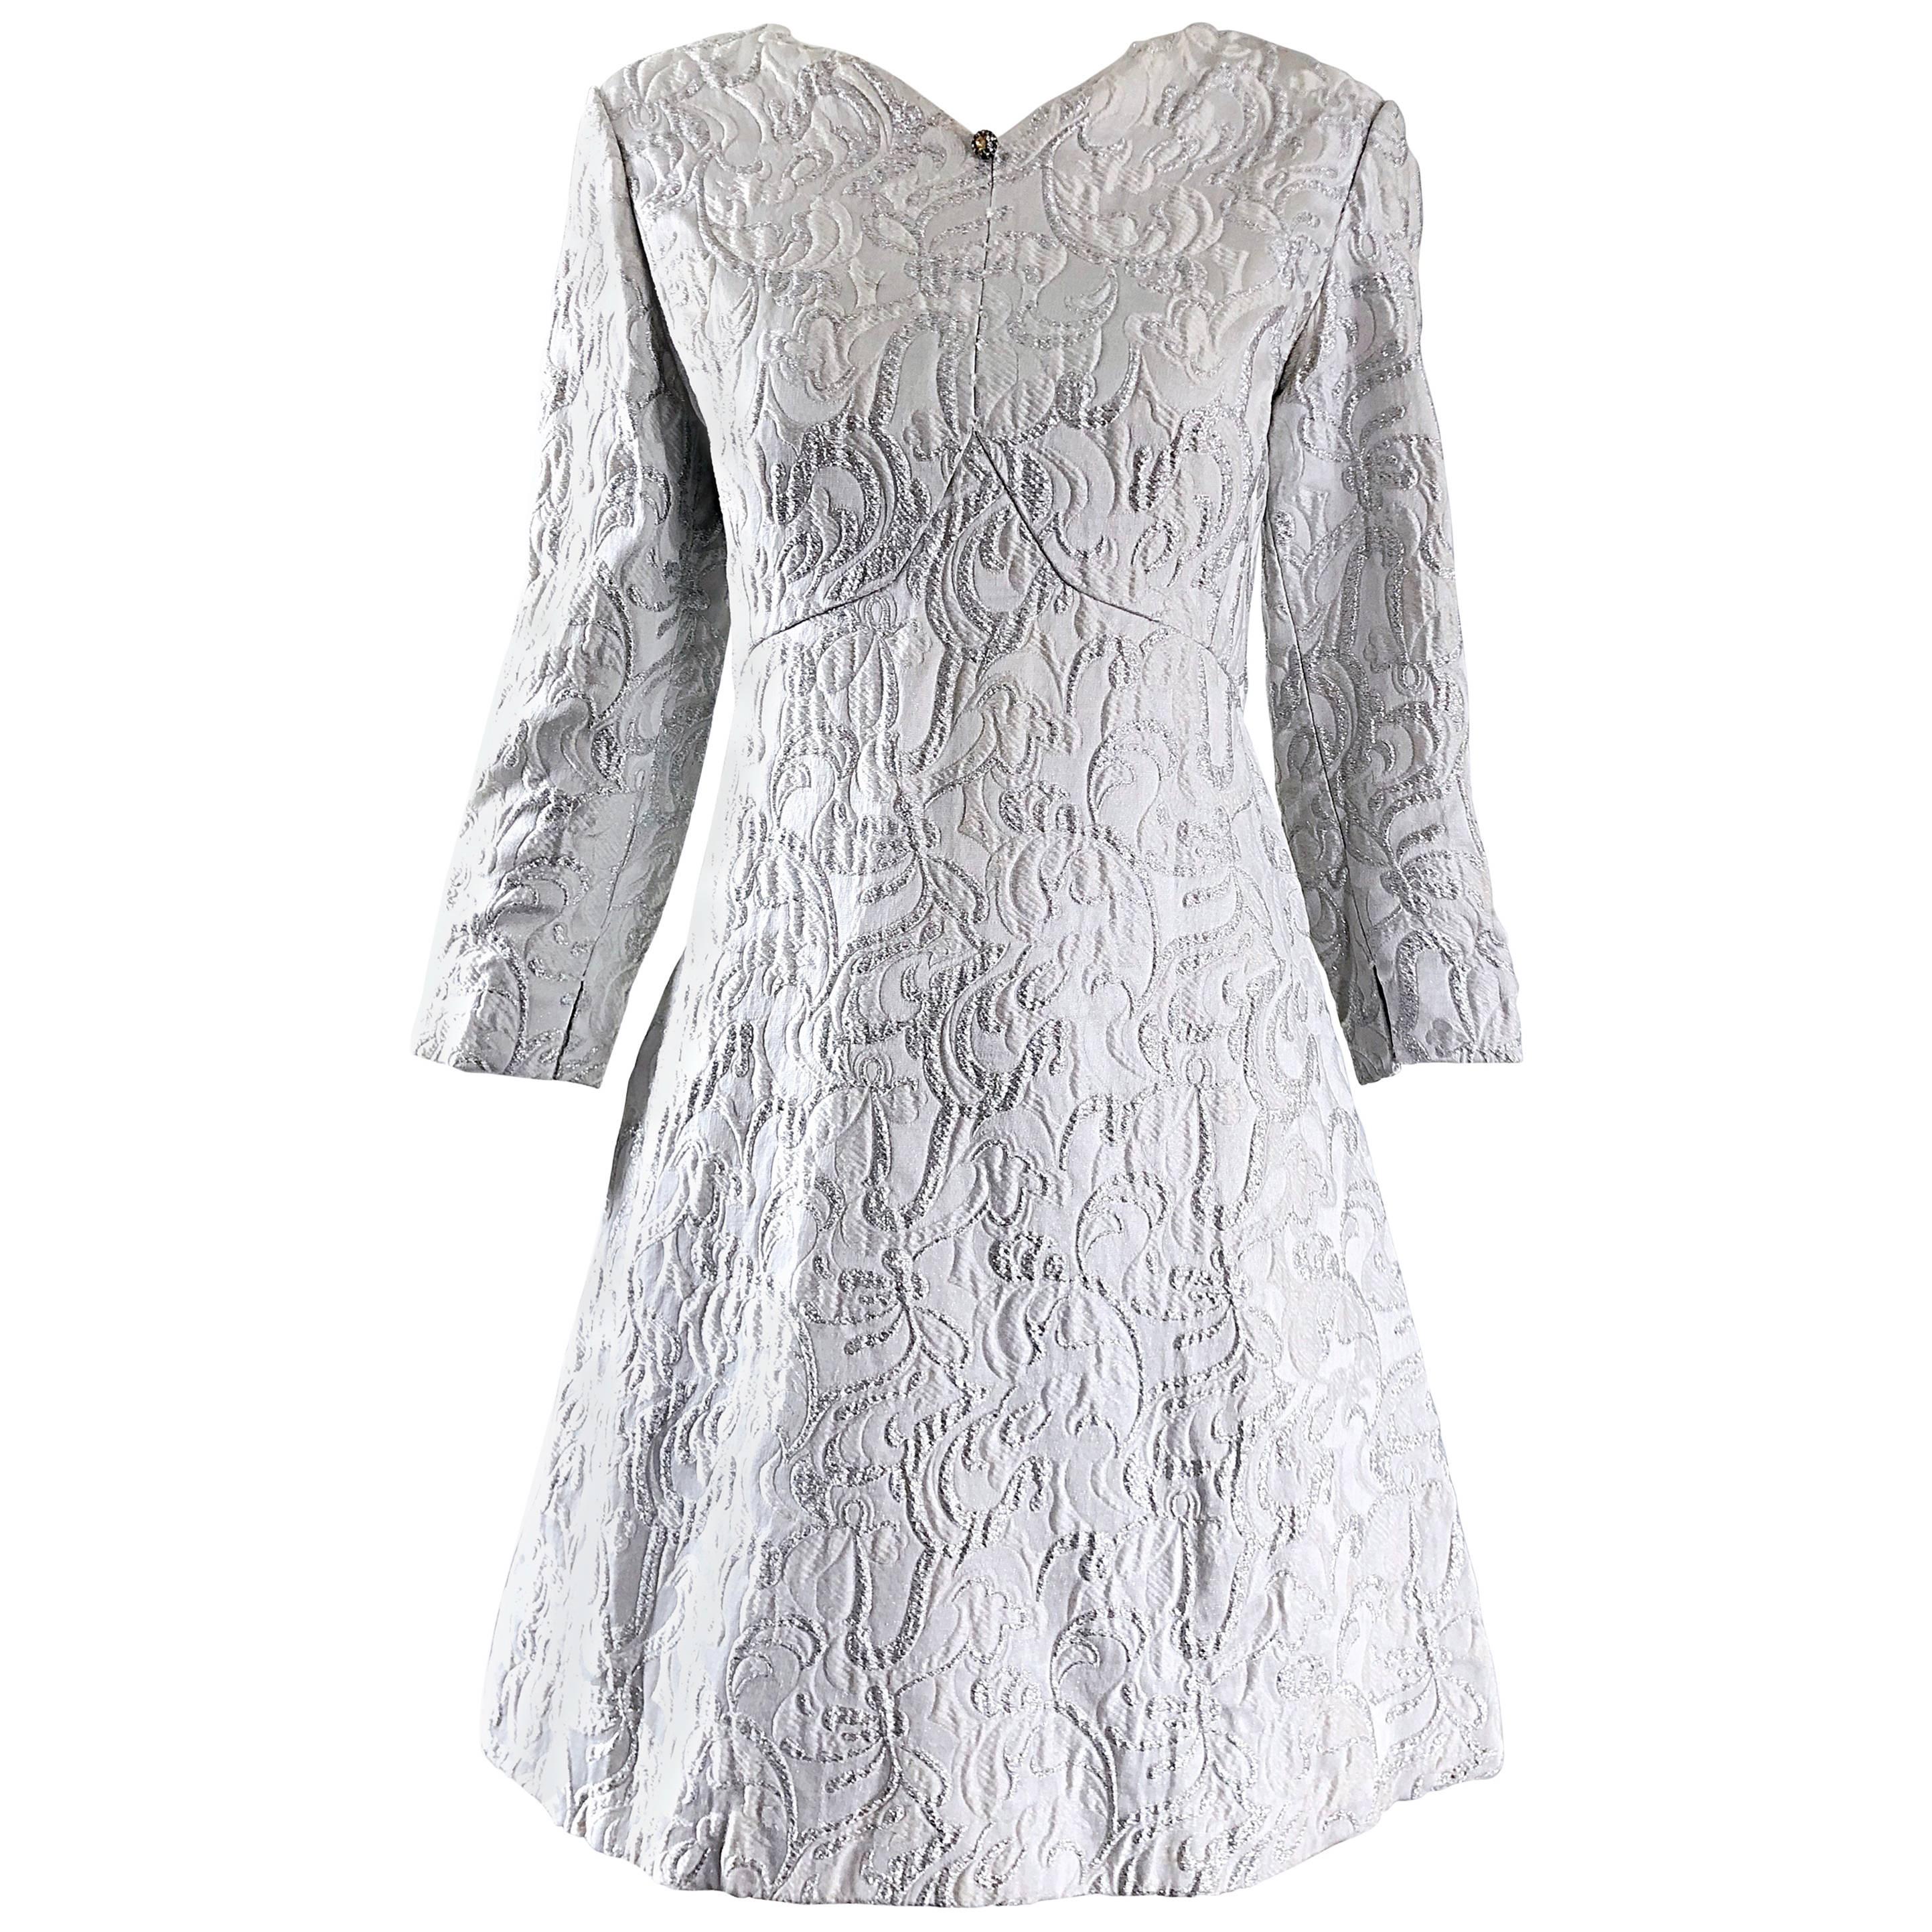 Documented Ceil Chapman 1960s silk brocade silver and white A-Line dress